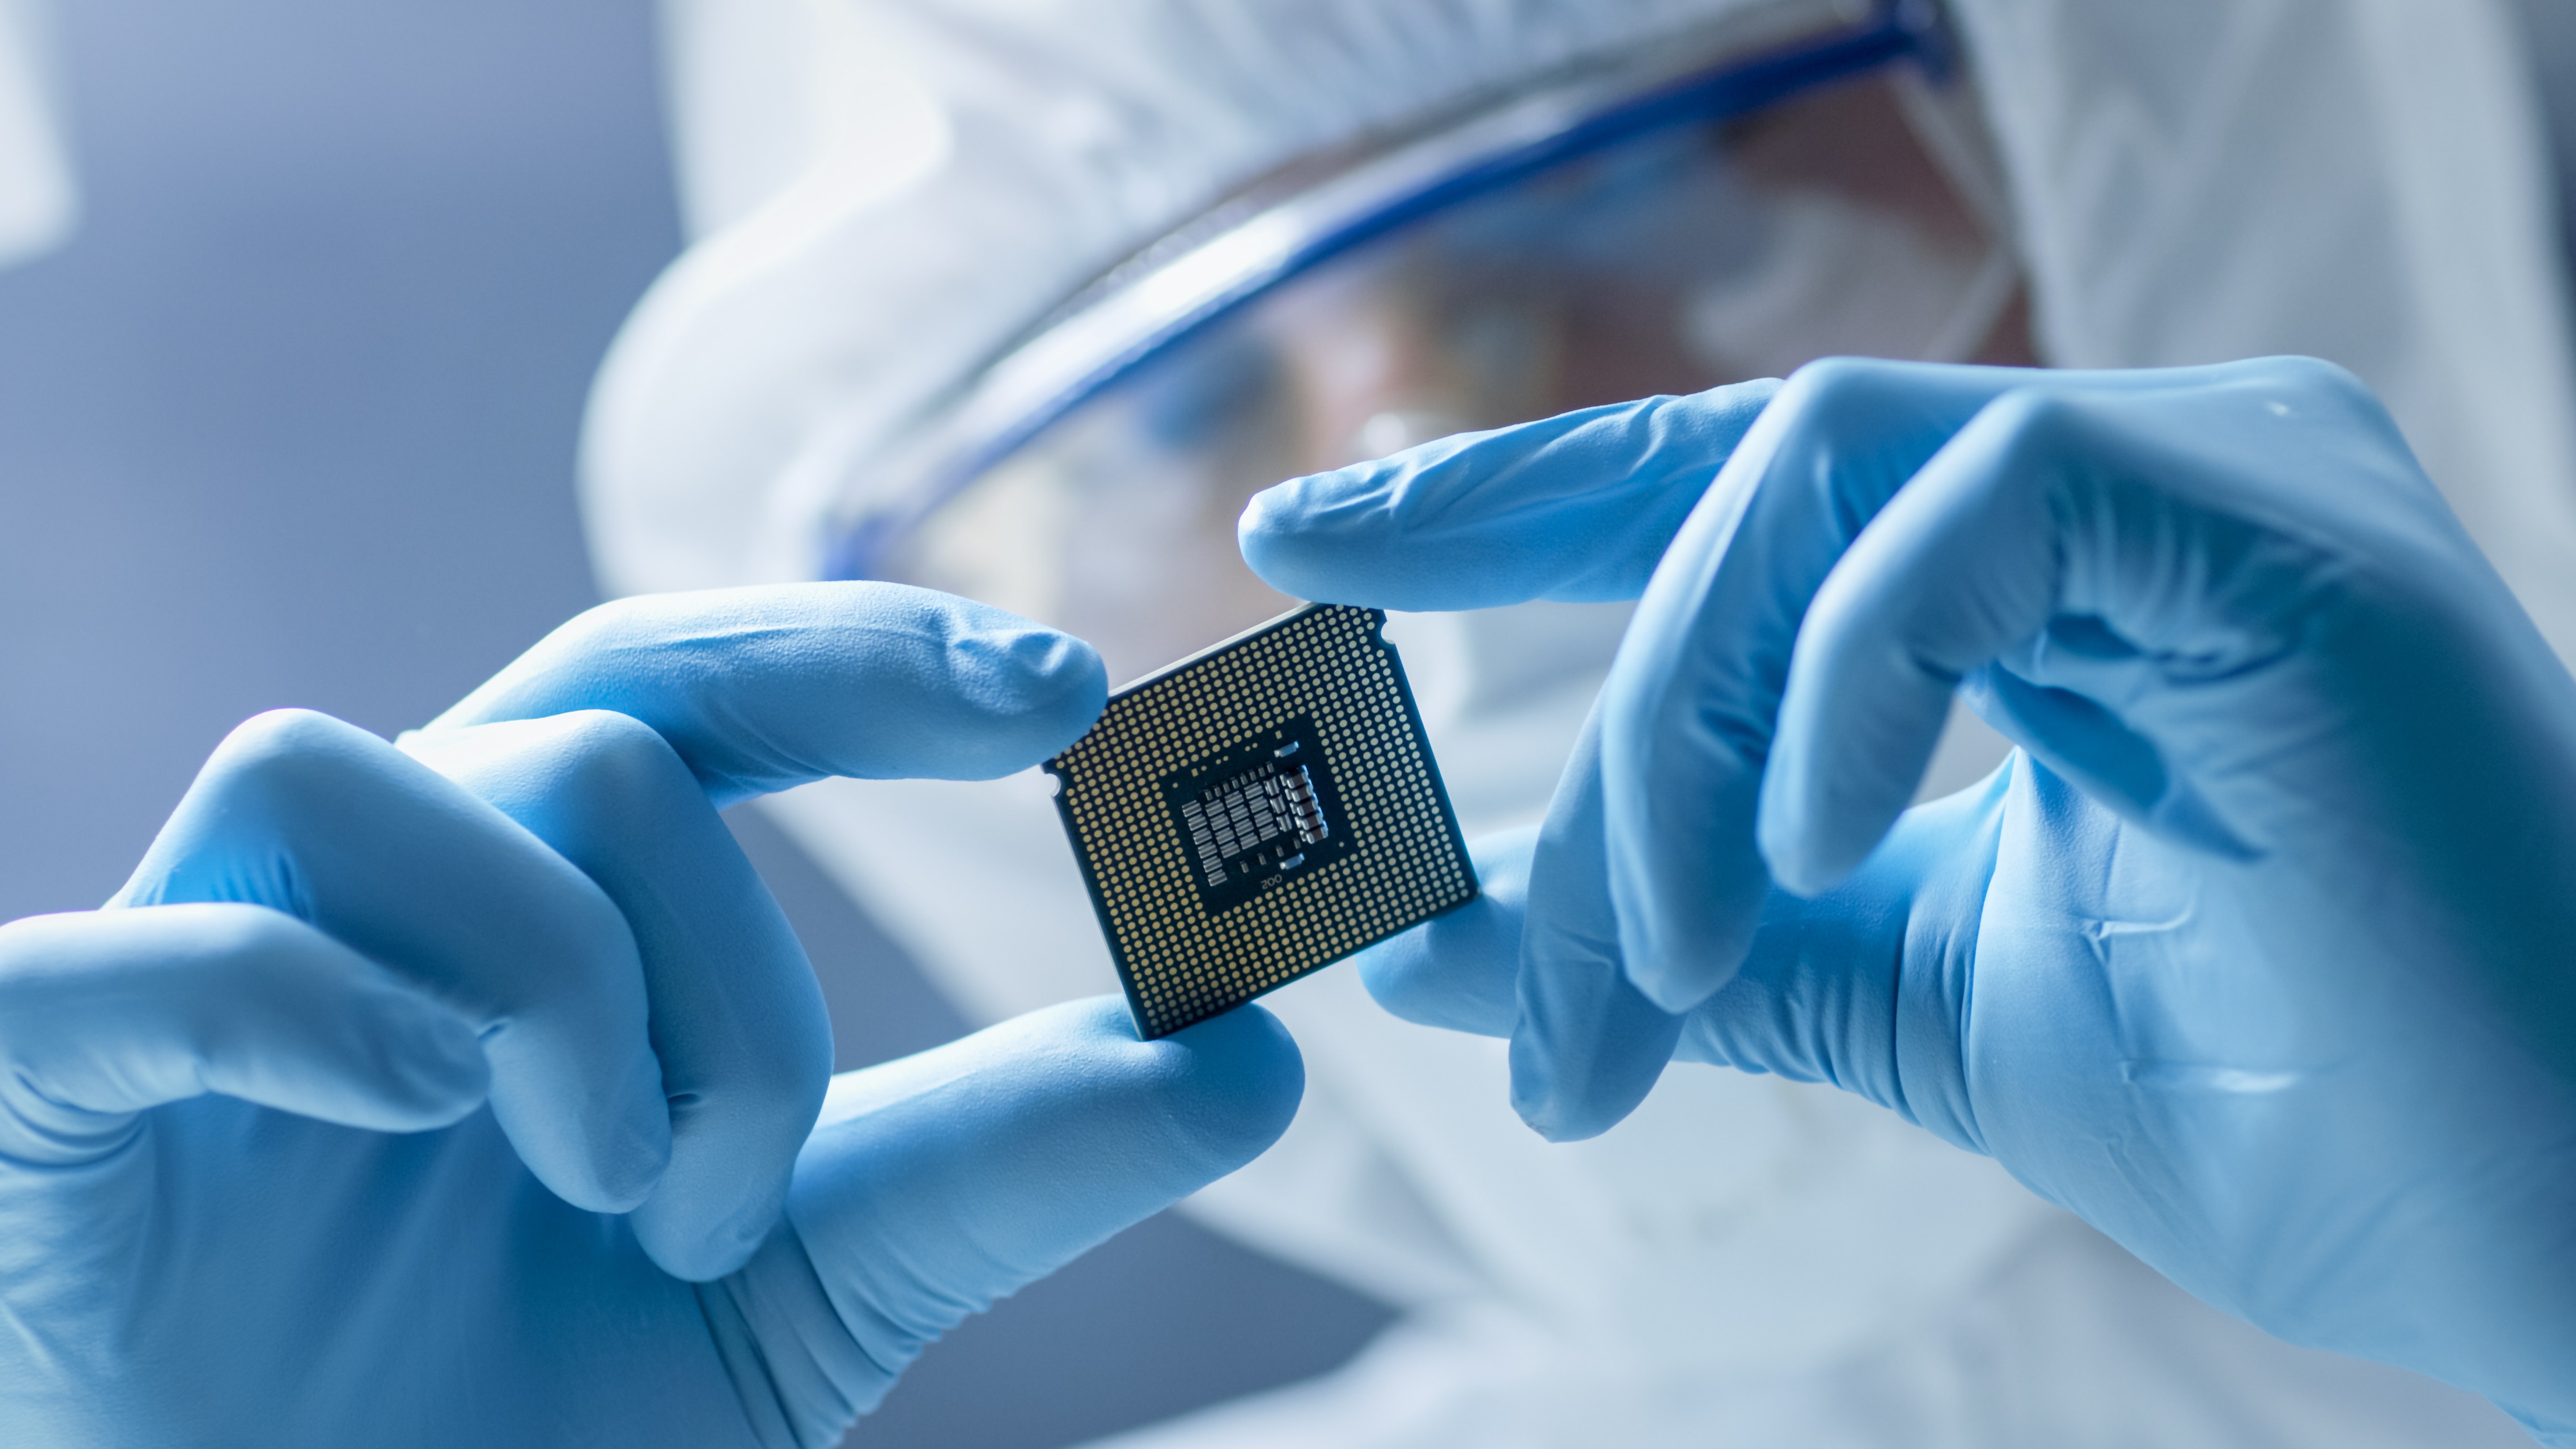 Semiconductor Shortage Is 'Going to Bite' Longer, Has a Russia-Ukraine Connection: Analyst